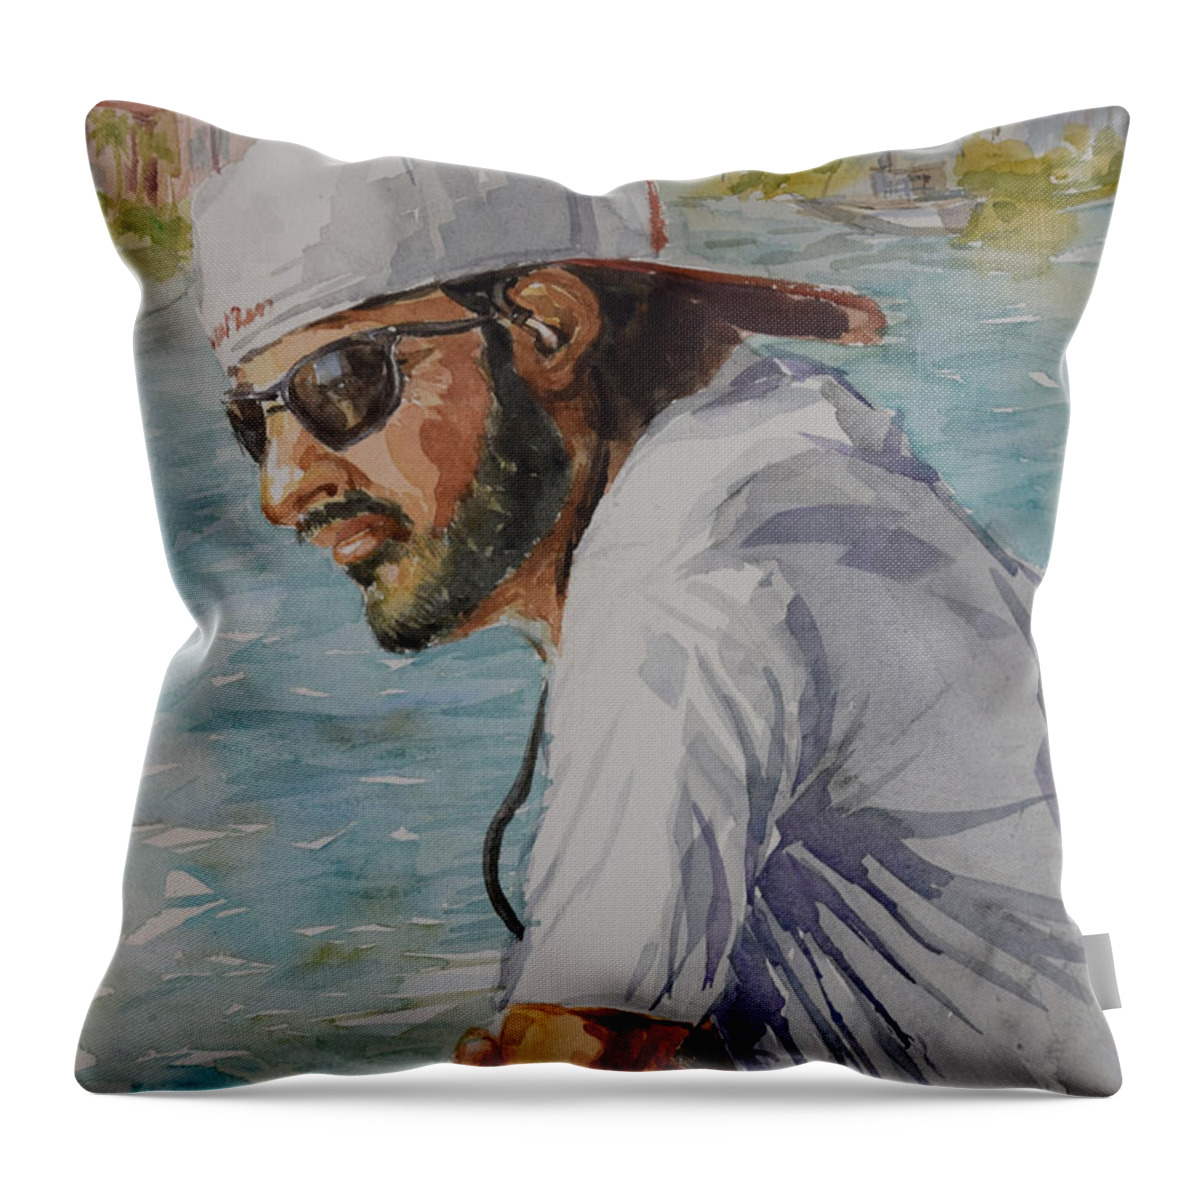 On The Boat Throw Pillow featuring the painting In Tuned by Jyotika Shroff